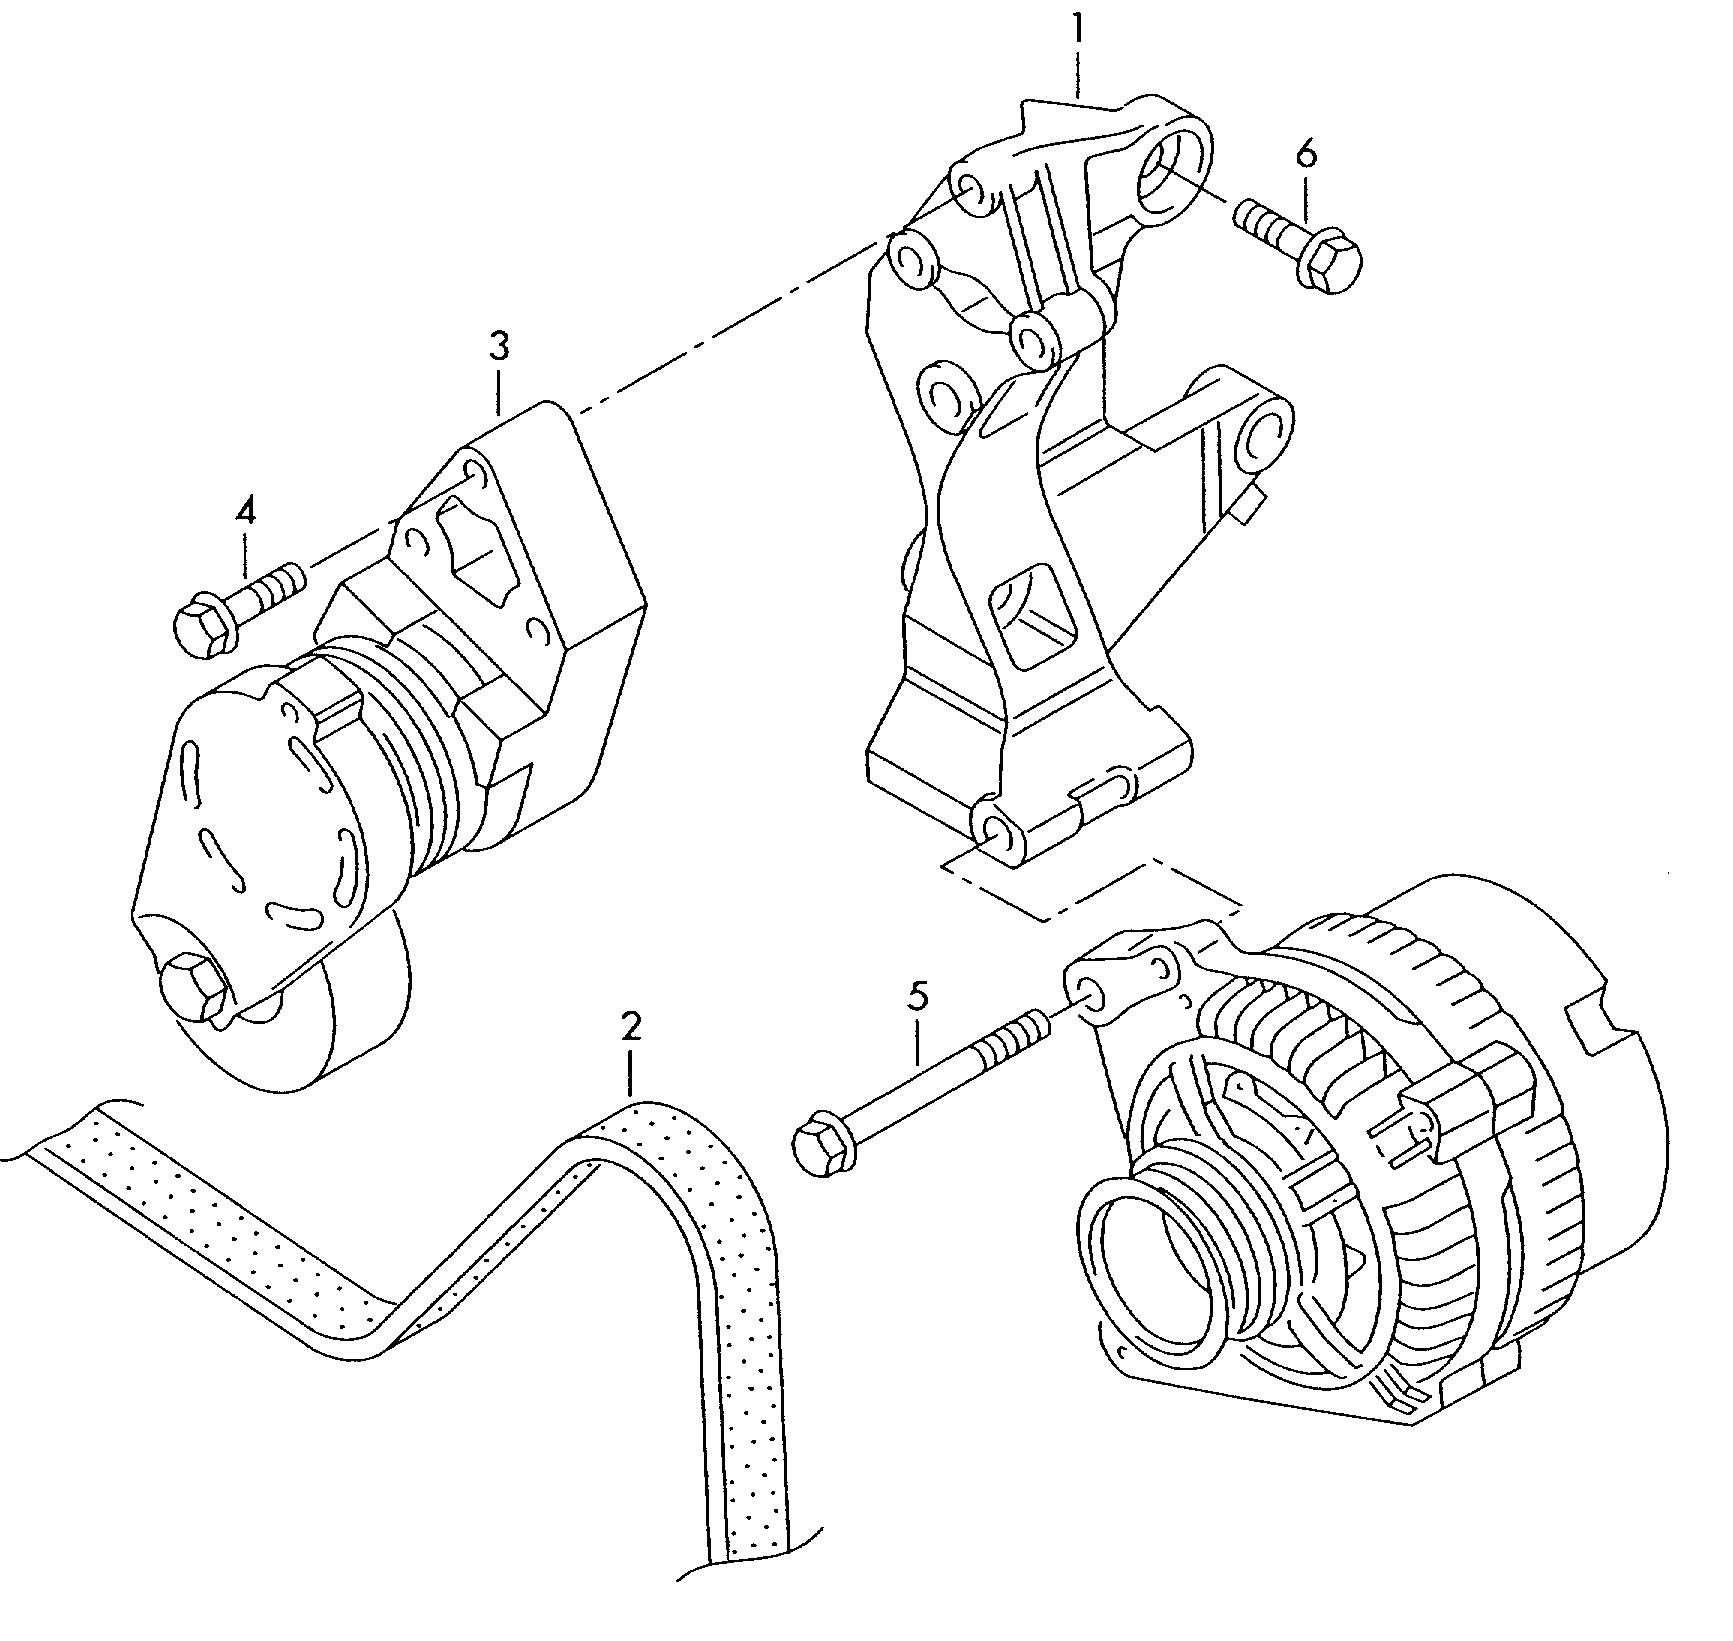 connecting and mounting parts<br>for alternatorPoly-V-belt 1.4ltr. - Fabia - fab